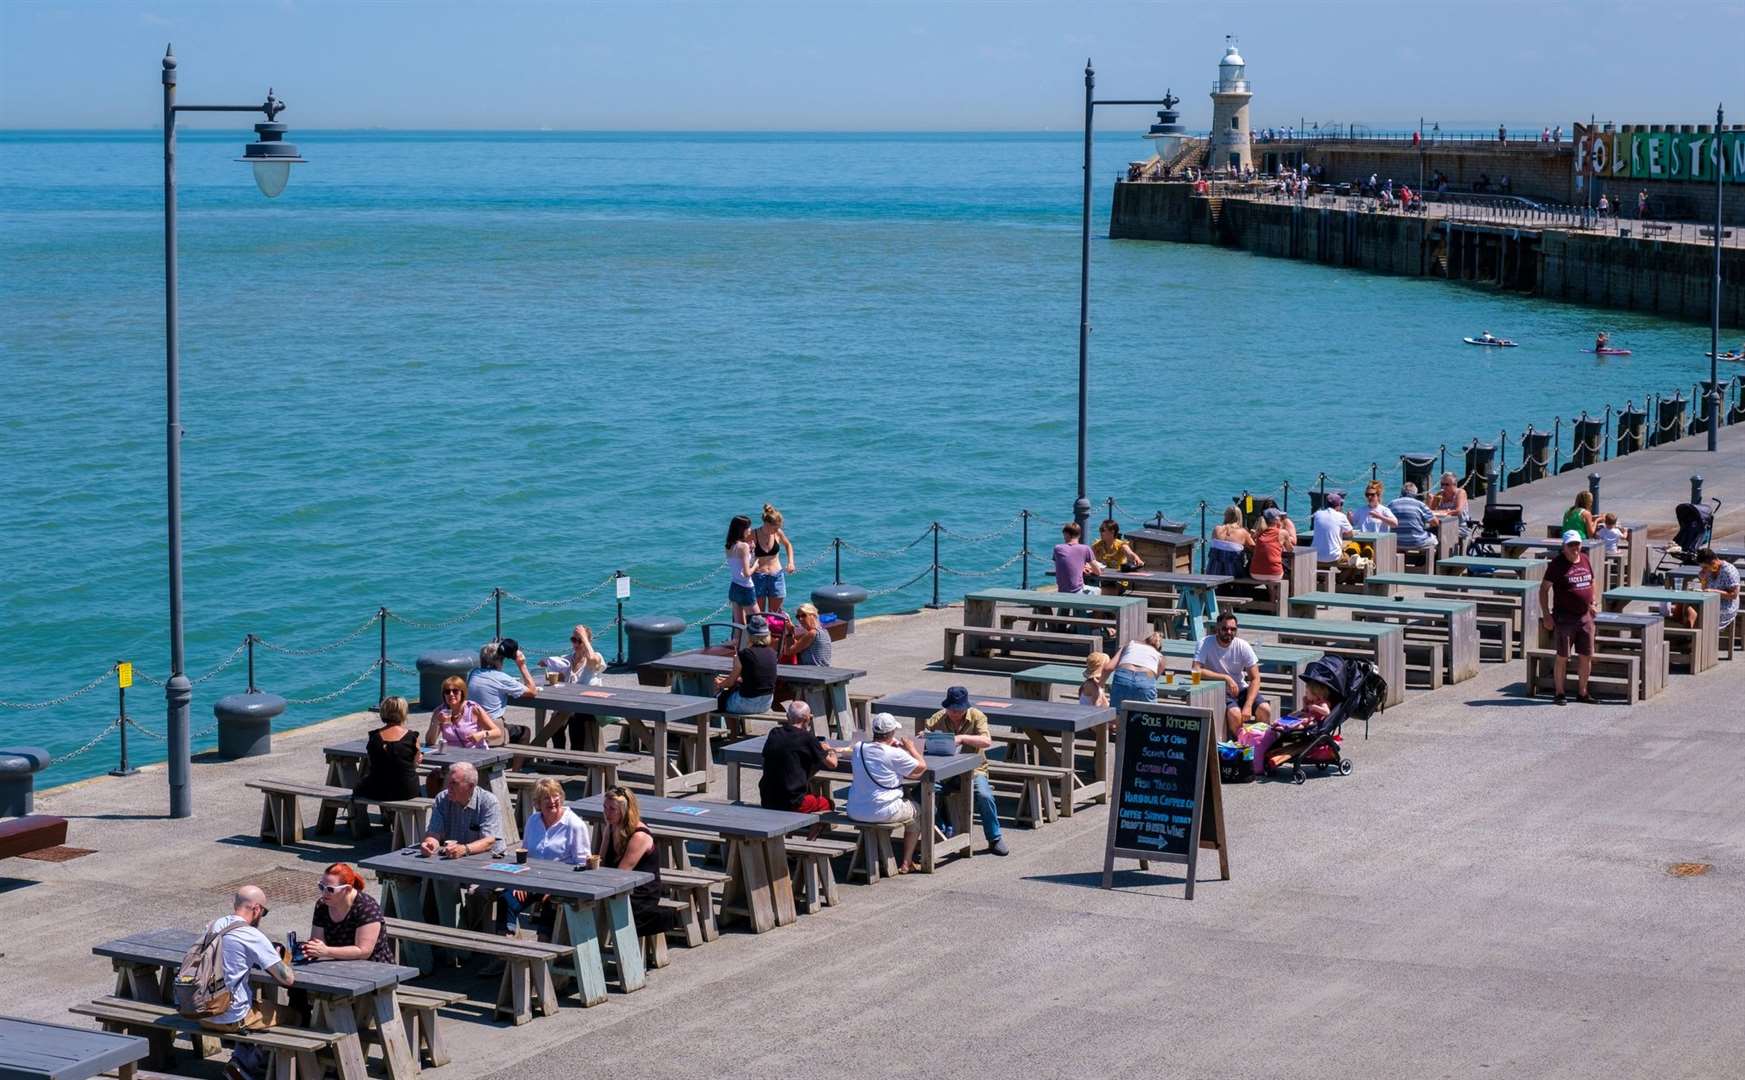 Folkestone Harbour Arm has become a popular attraction